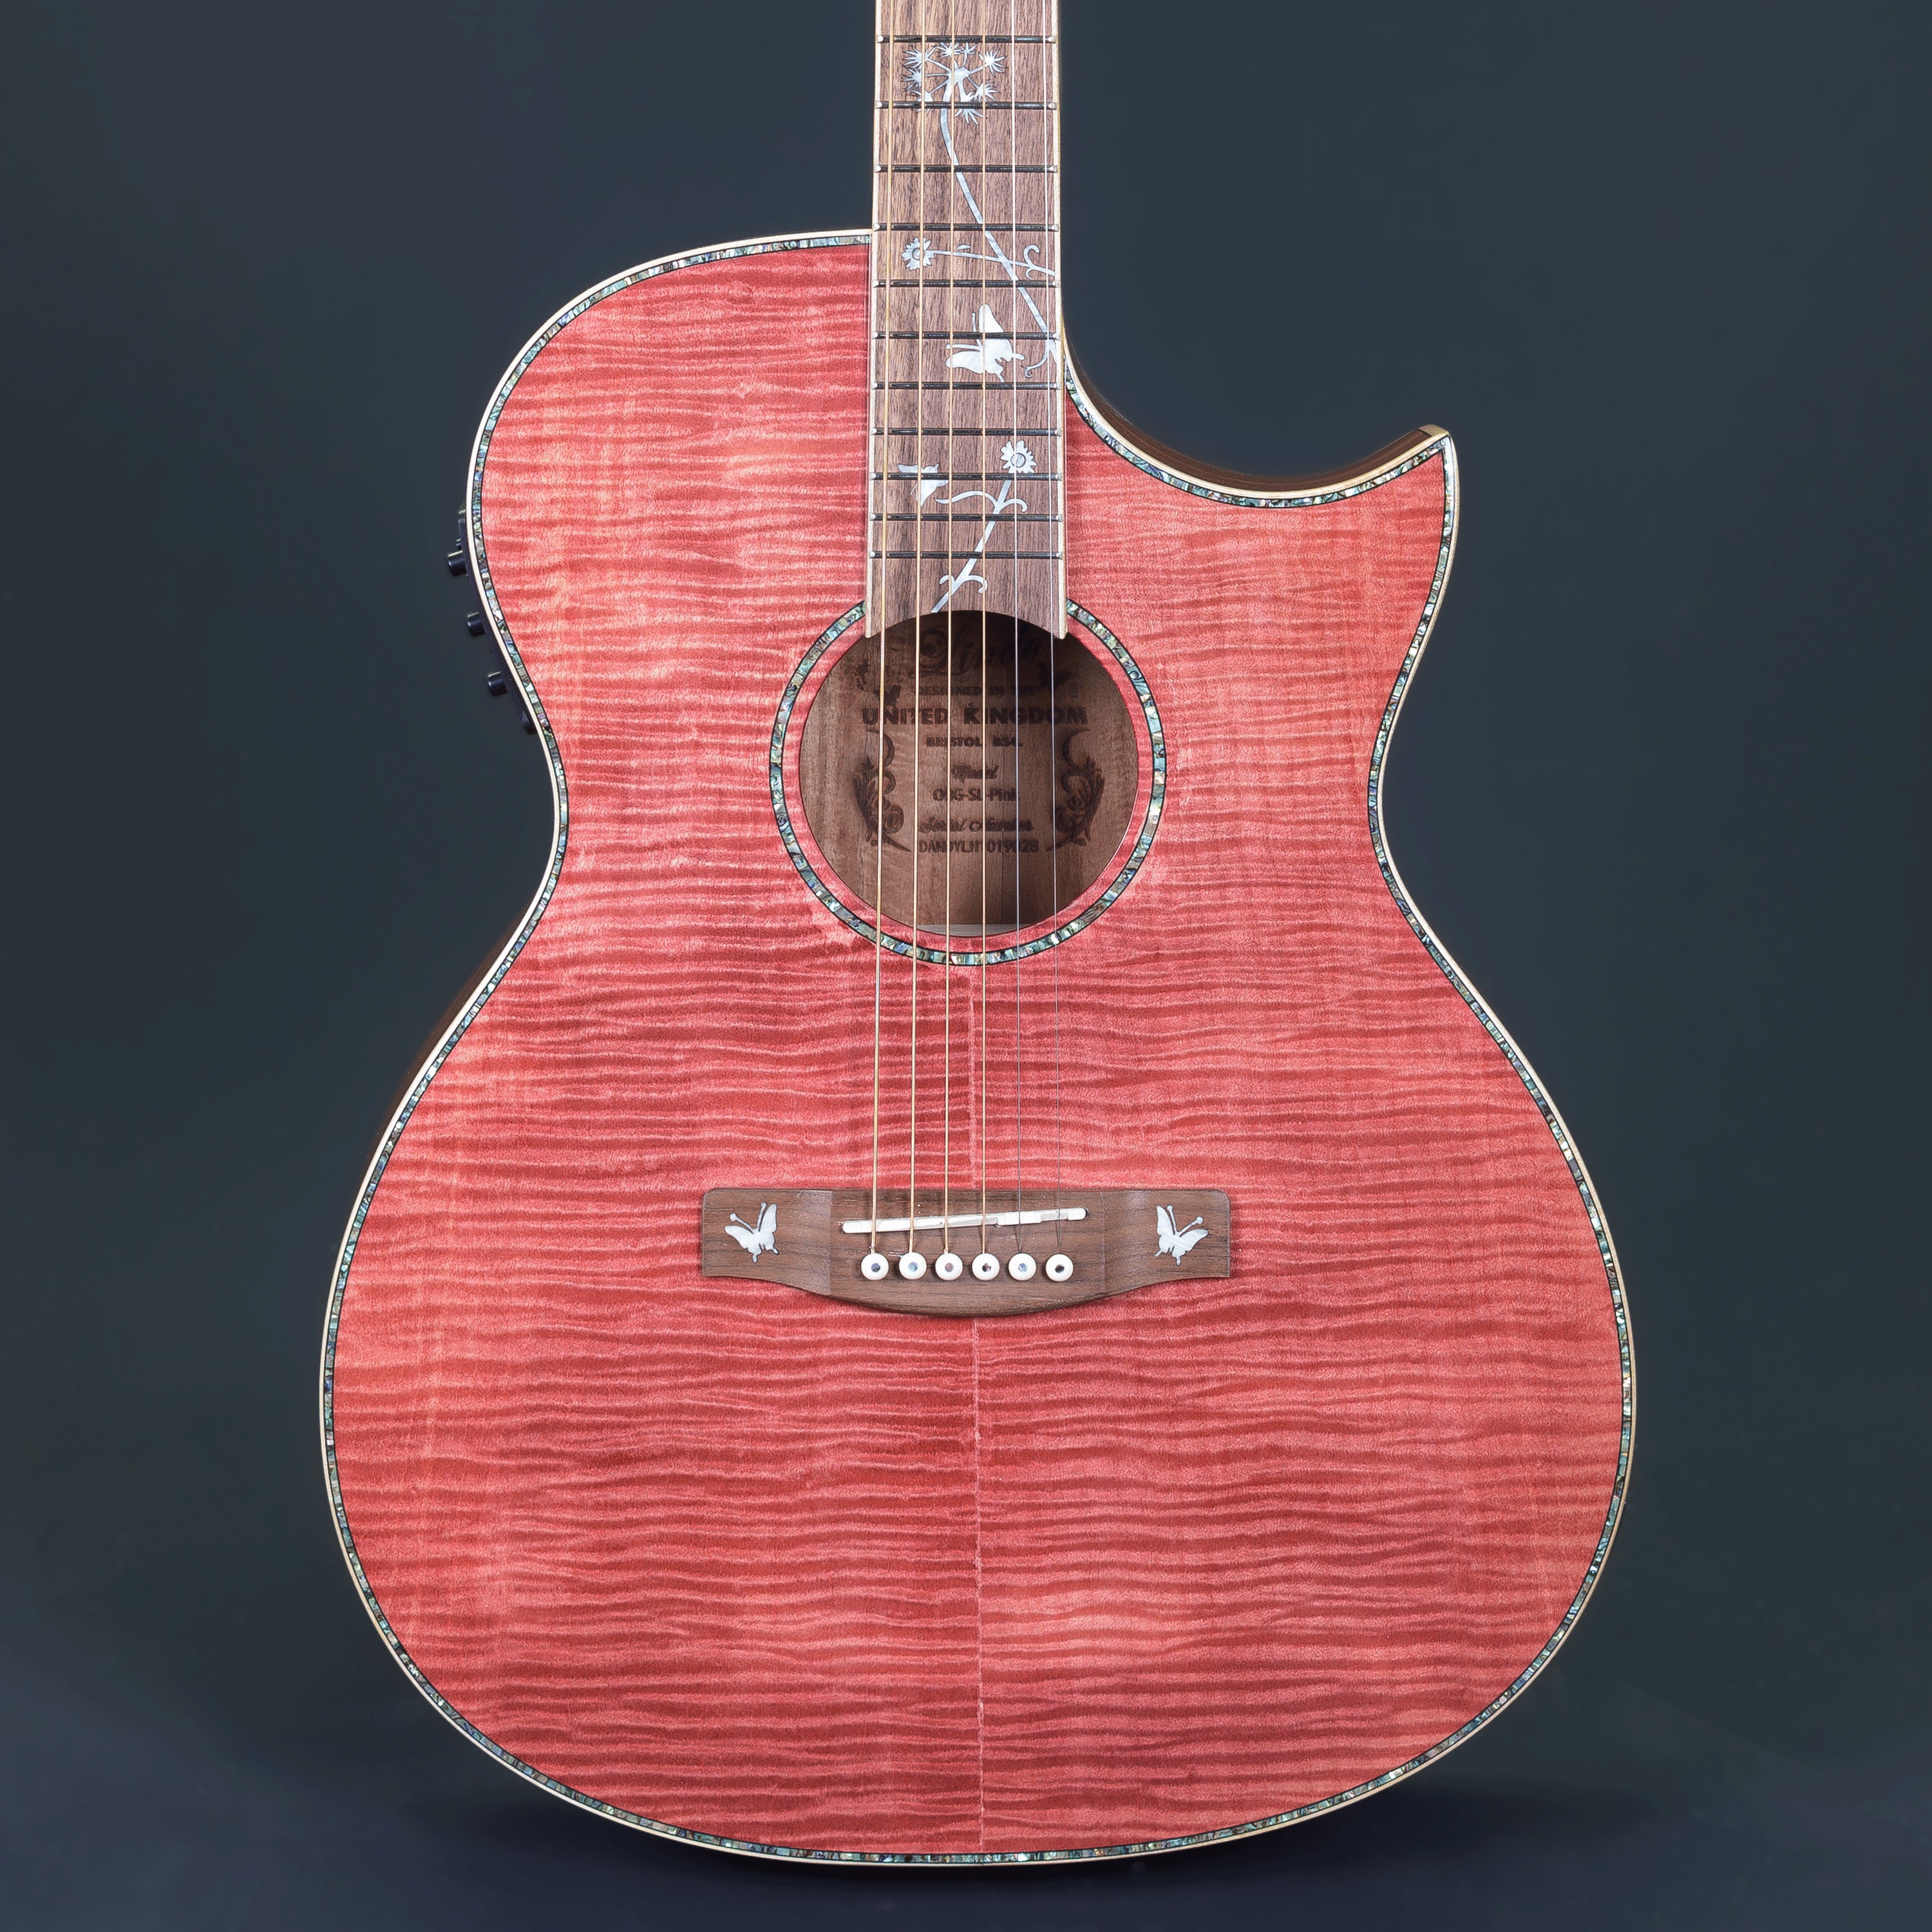 Lindo Dandelion Pink Slim Body Electro-acoustic Guitar With photo